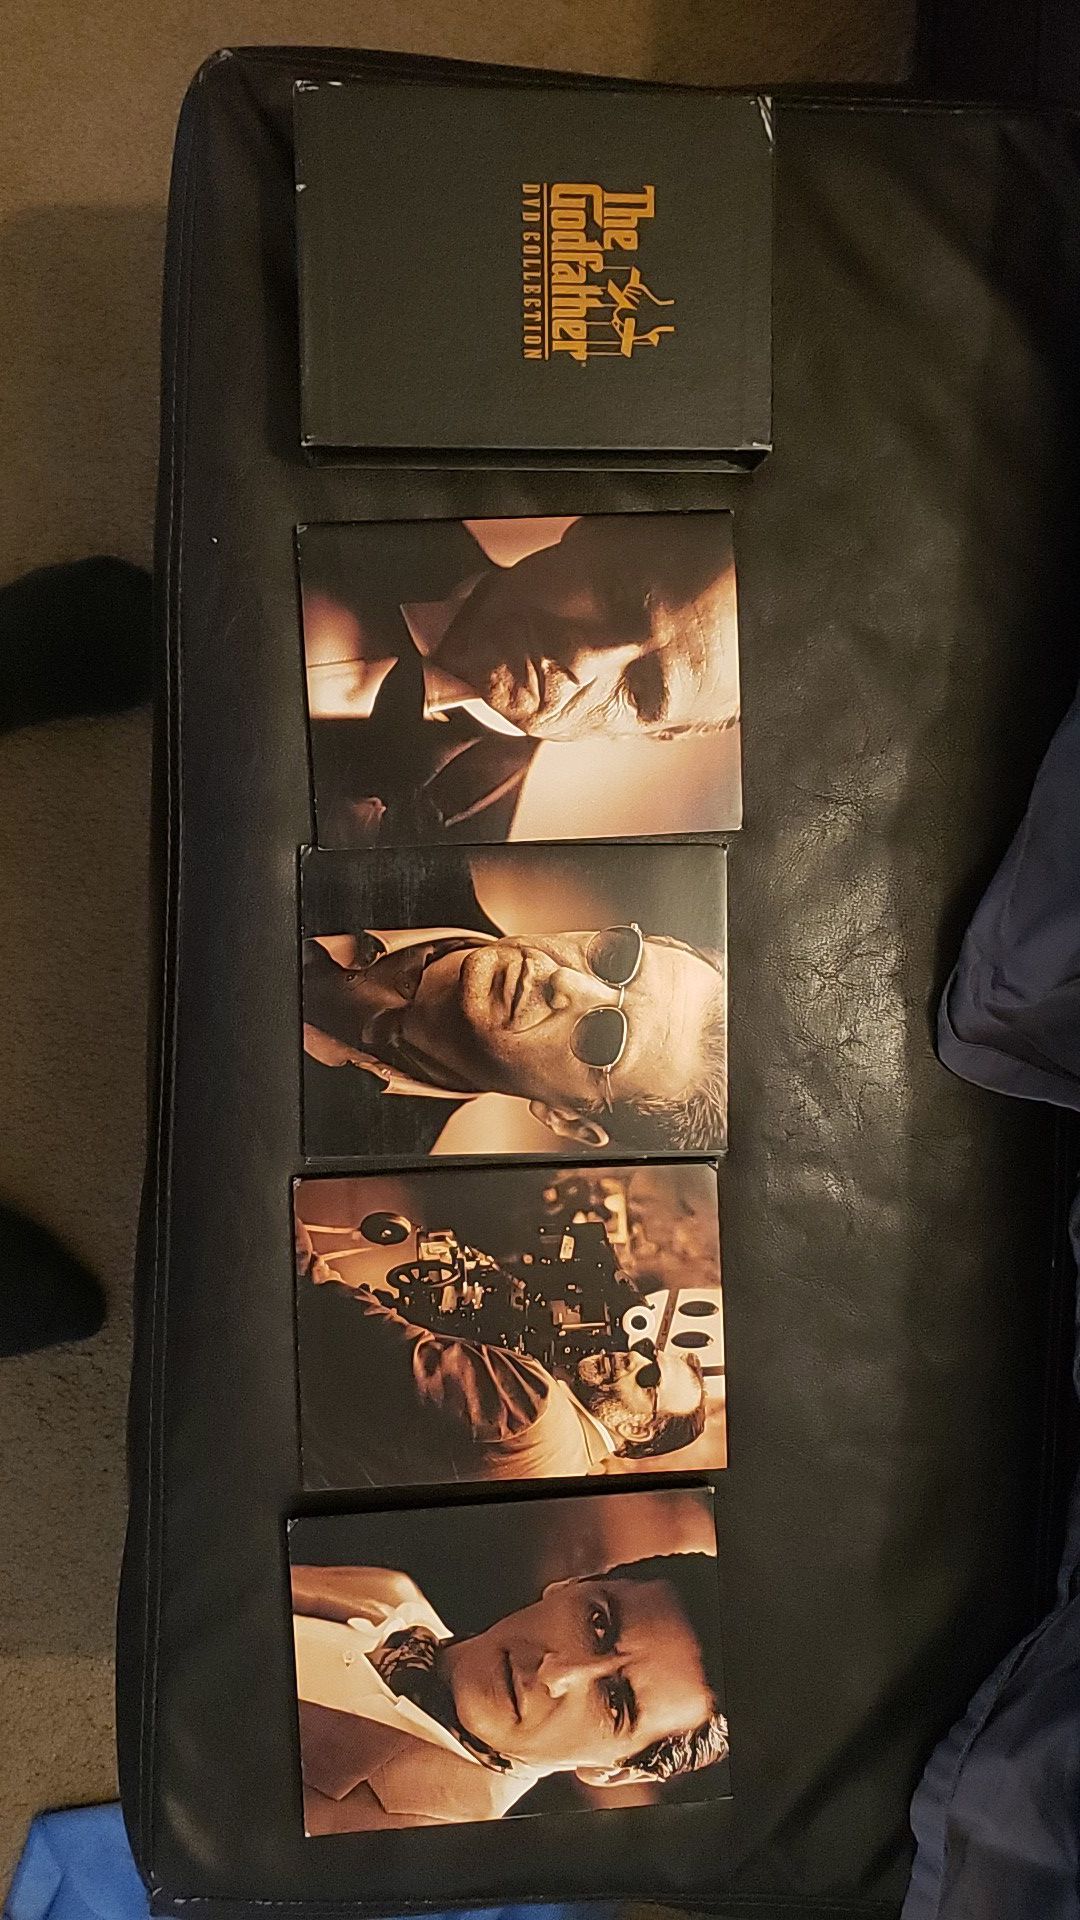 The Godfather DVD collection